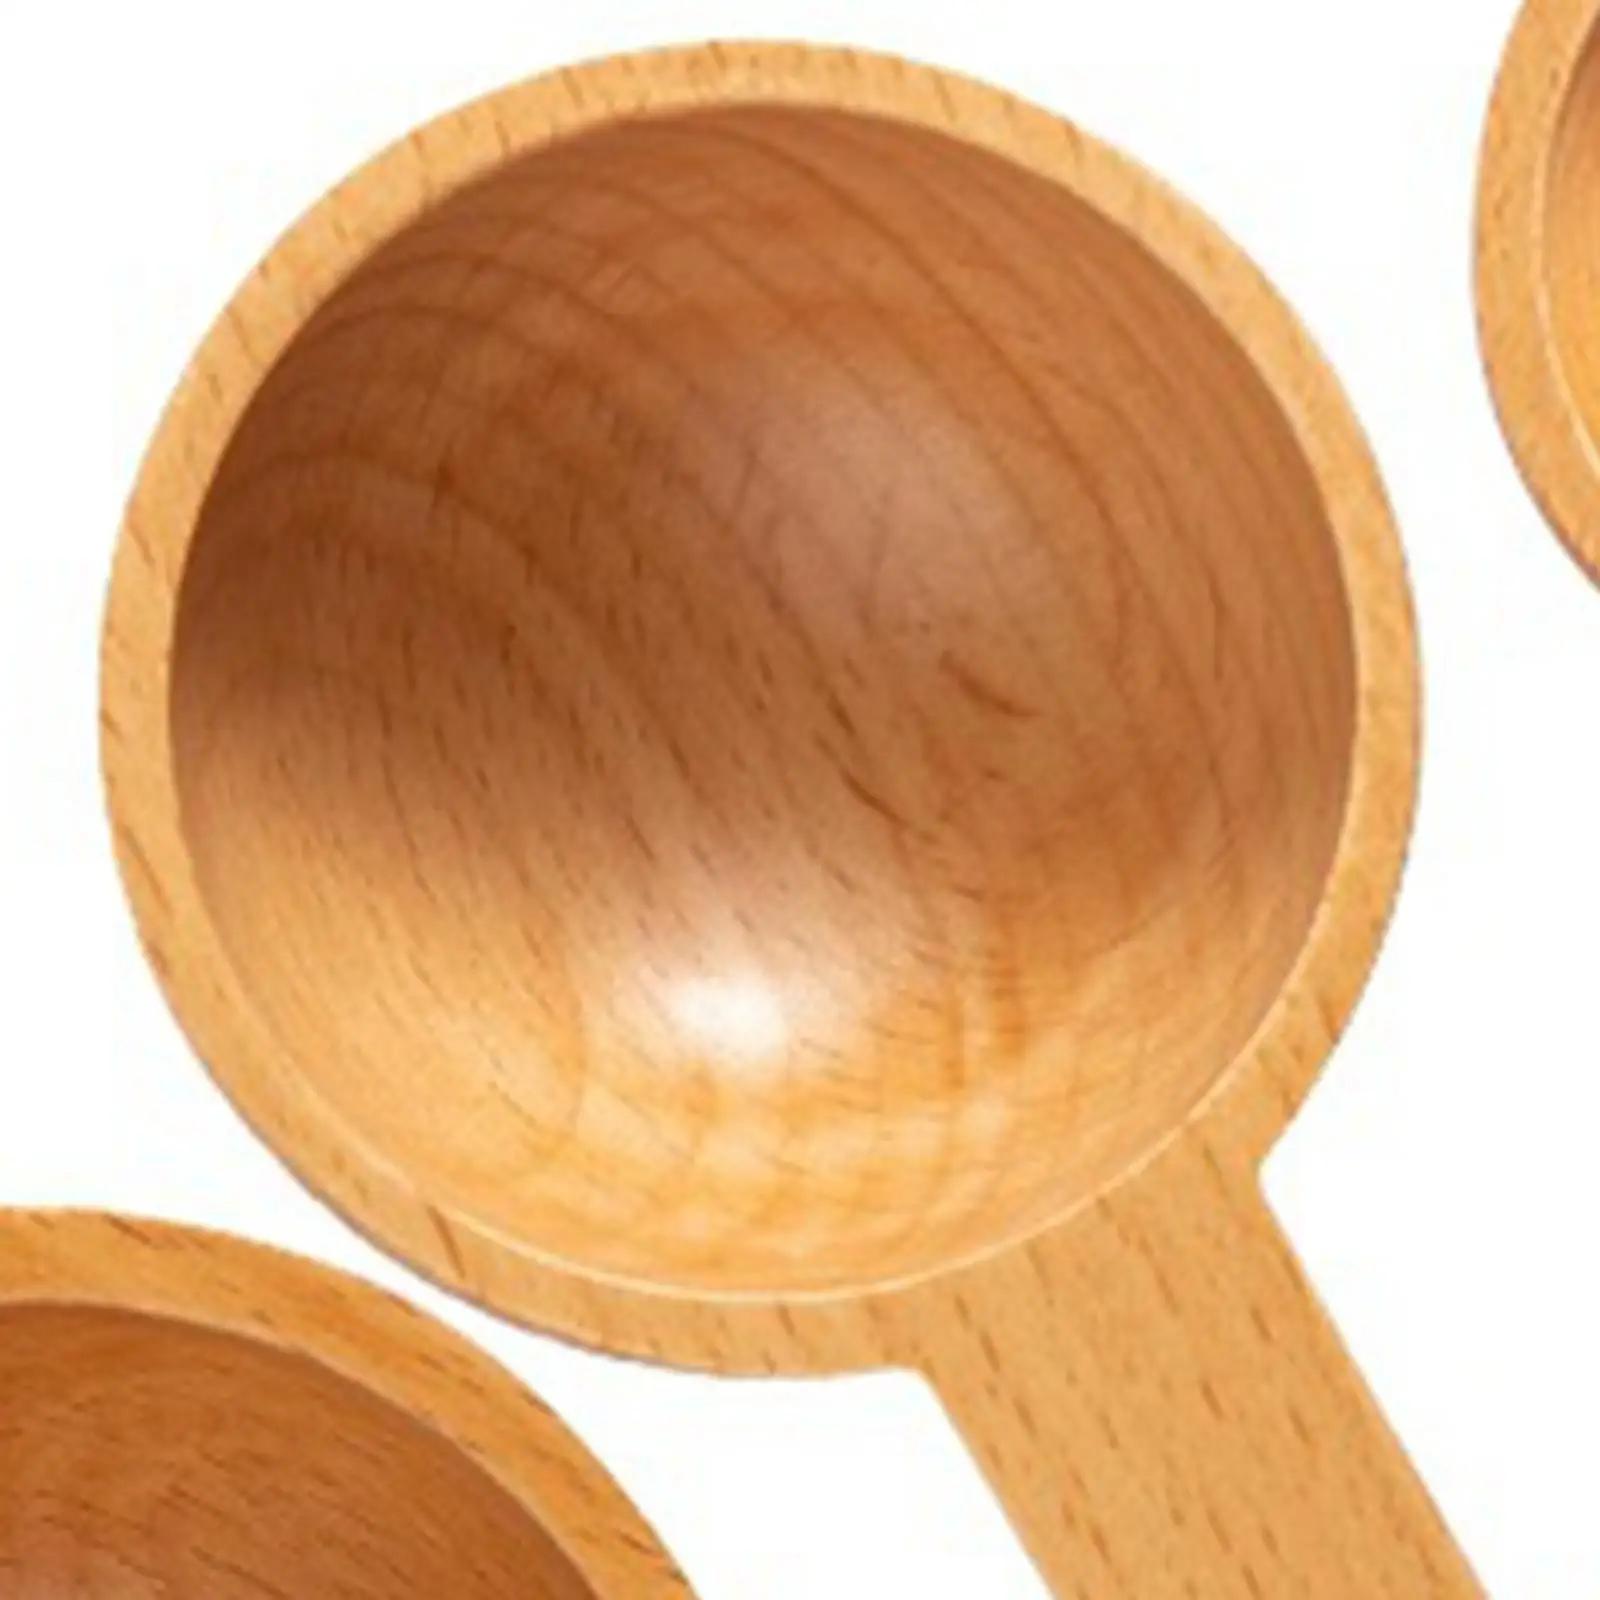 Set of 5 Wooden Measuring Spoons Multipurpose Portable Accessories Tools Gadgets Coffee Spoon for Kitchen Baking Dry Liquid Food